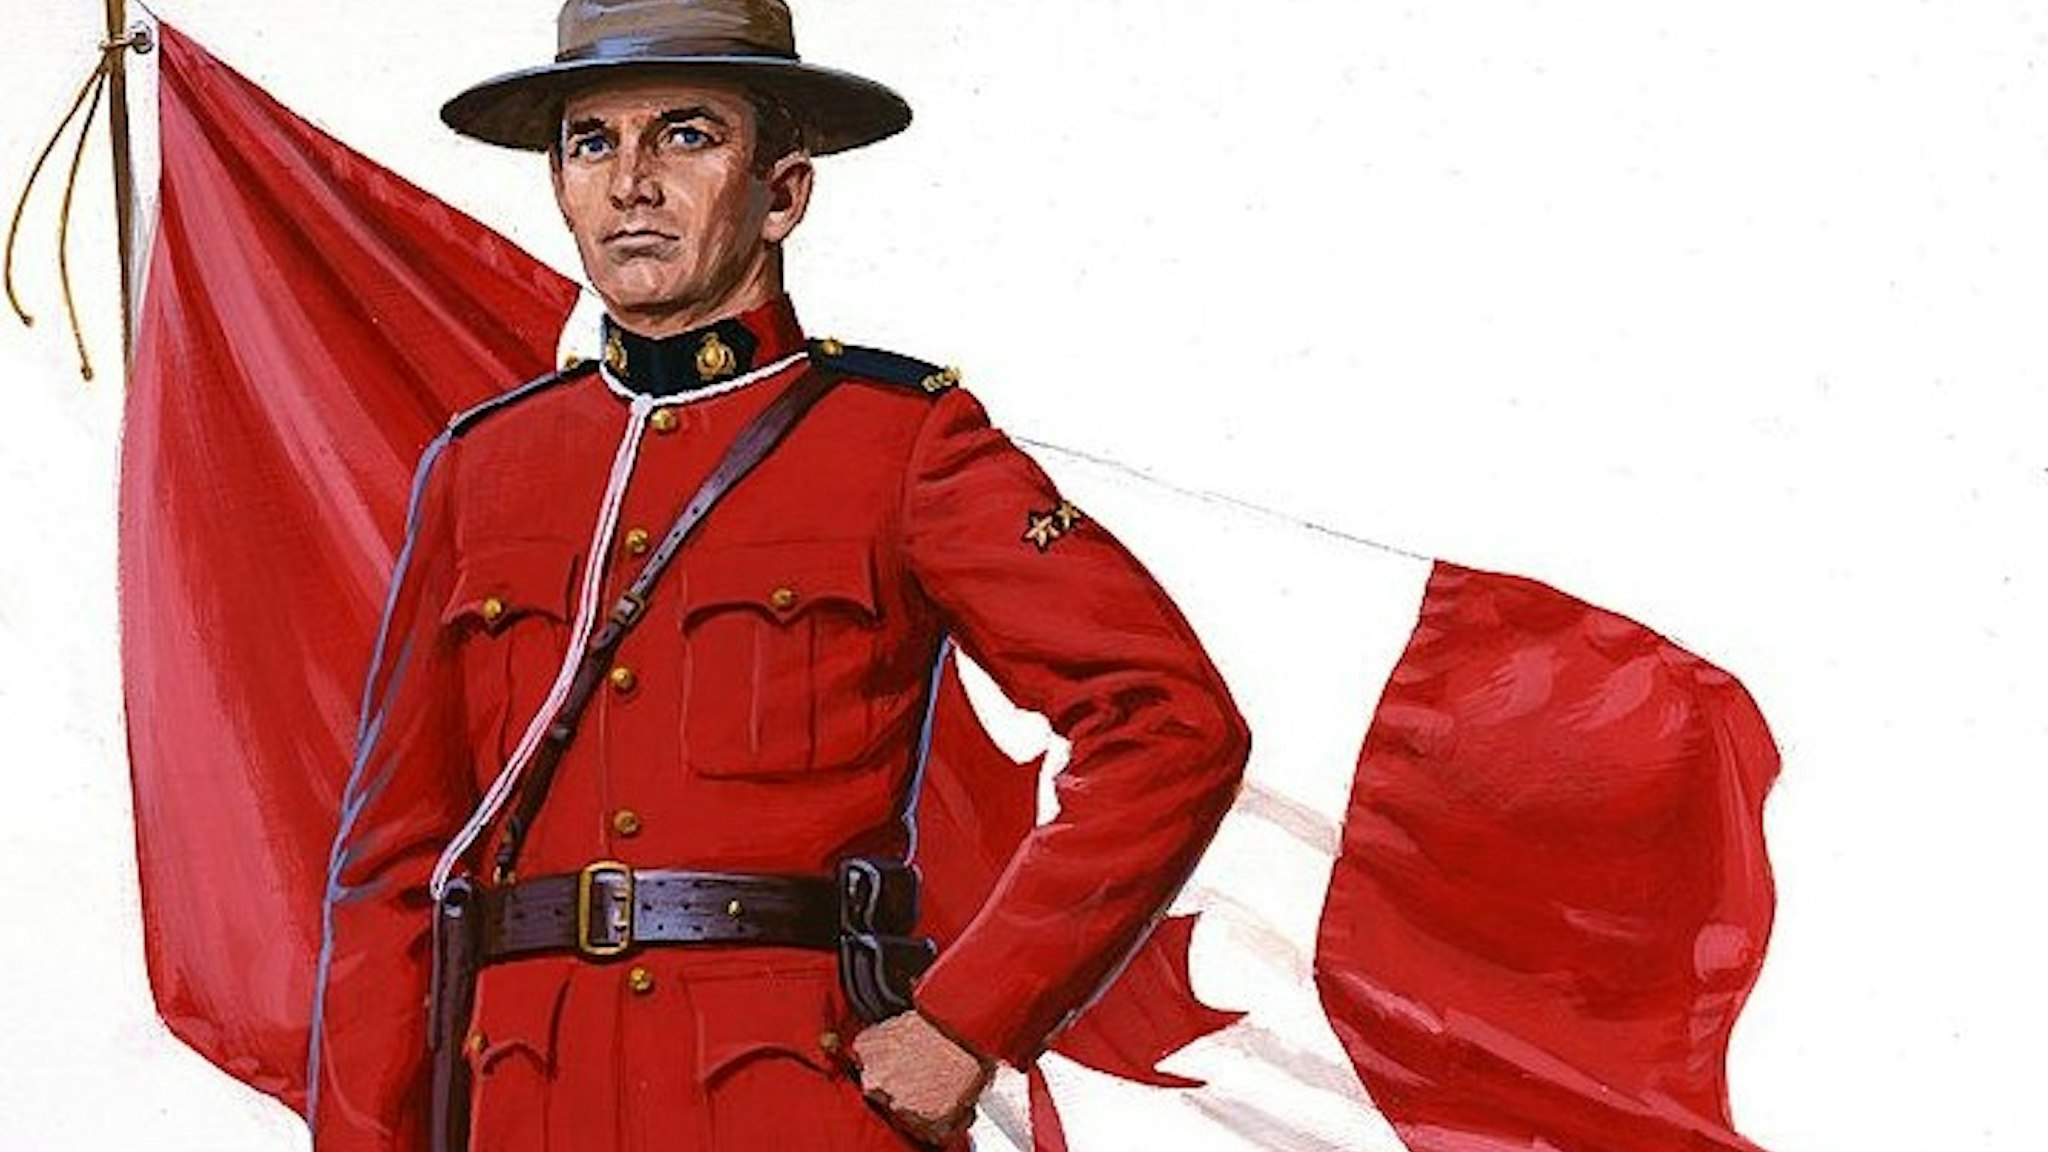 CANADA - 1960: A painting of a Canadian Mounted Policeman aka Mountie and a Canadian Flag in 1960 in Canada. (Illustration by